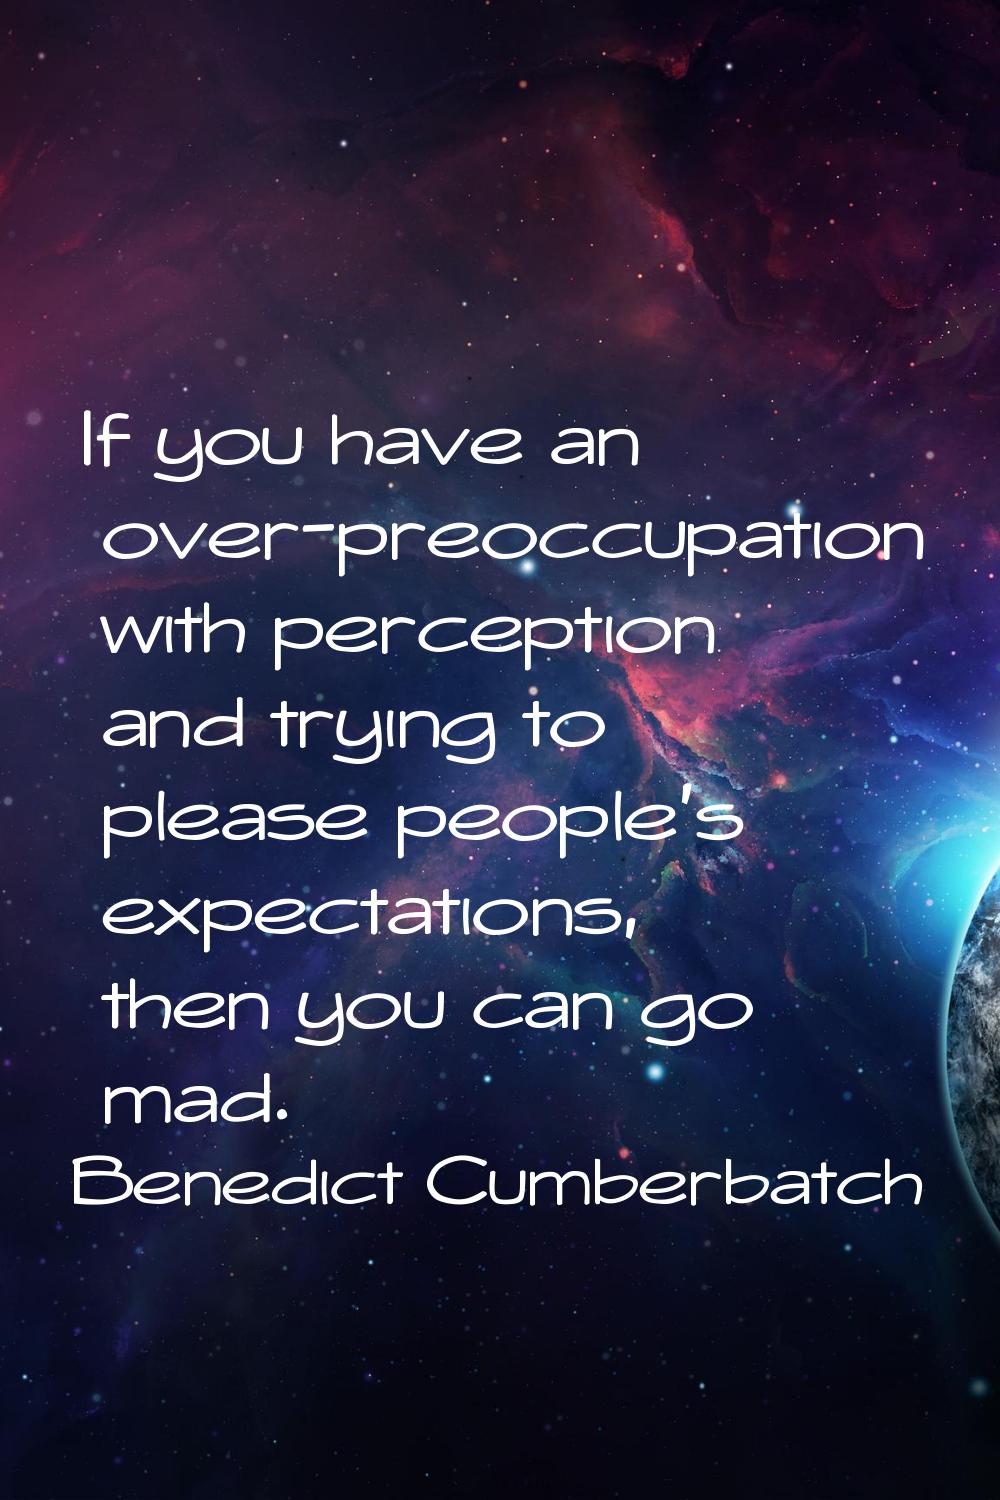 If you have an over-preoccupation with perception and trying to please people's expectations, then 